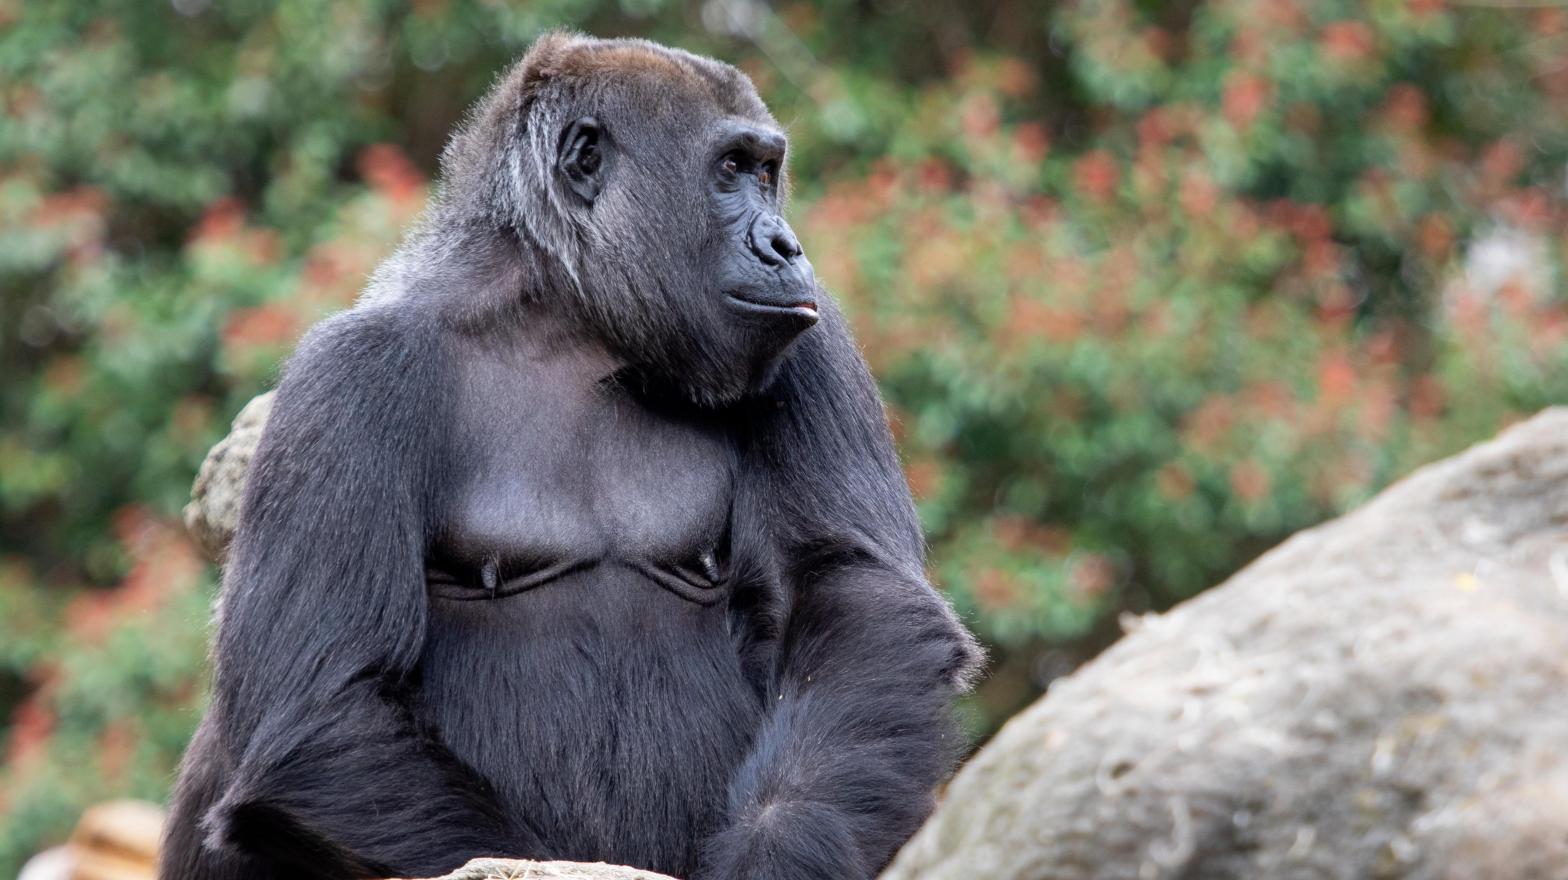 Sukari, a western lowland gorilla at Zoo Atlanta, was one of the gorillas that the researchers observed during this project.  (Image: Zoo Atlanta, CC-BY 4.0)